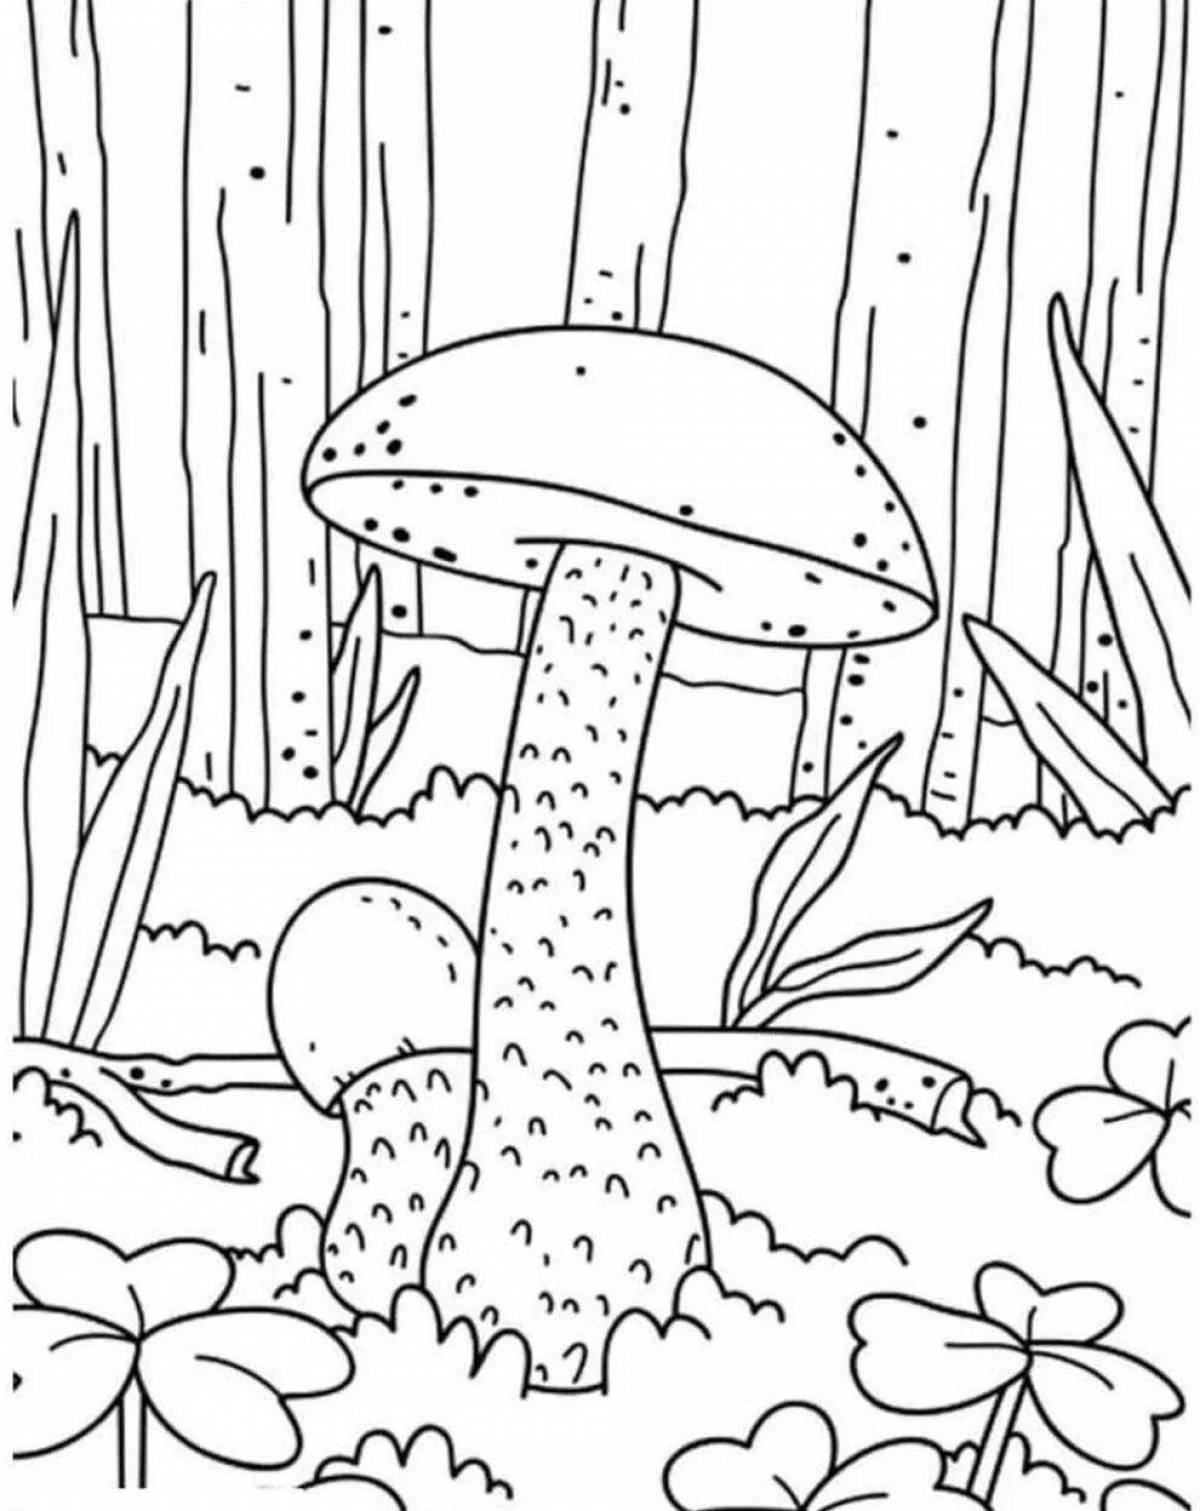 Incredible mushroom coloring book for 4-5 year olds